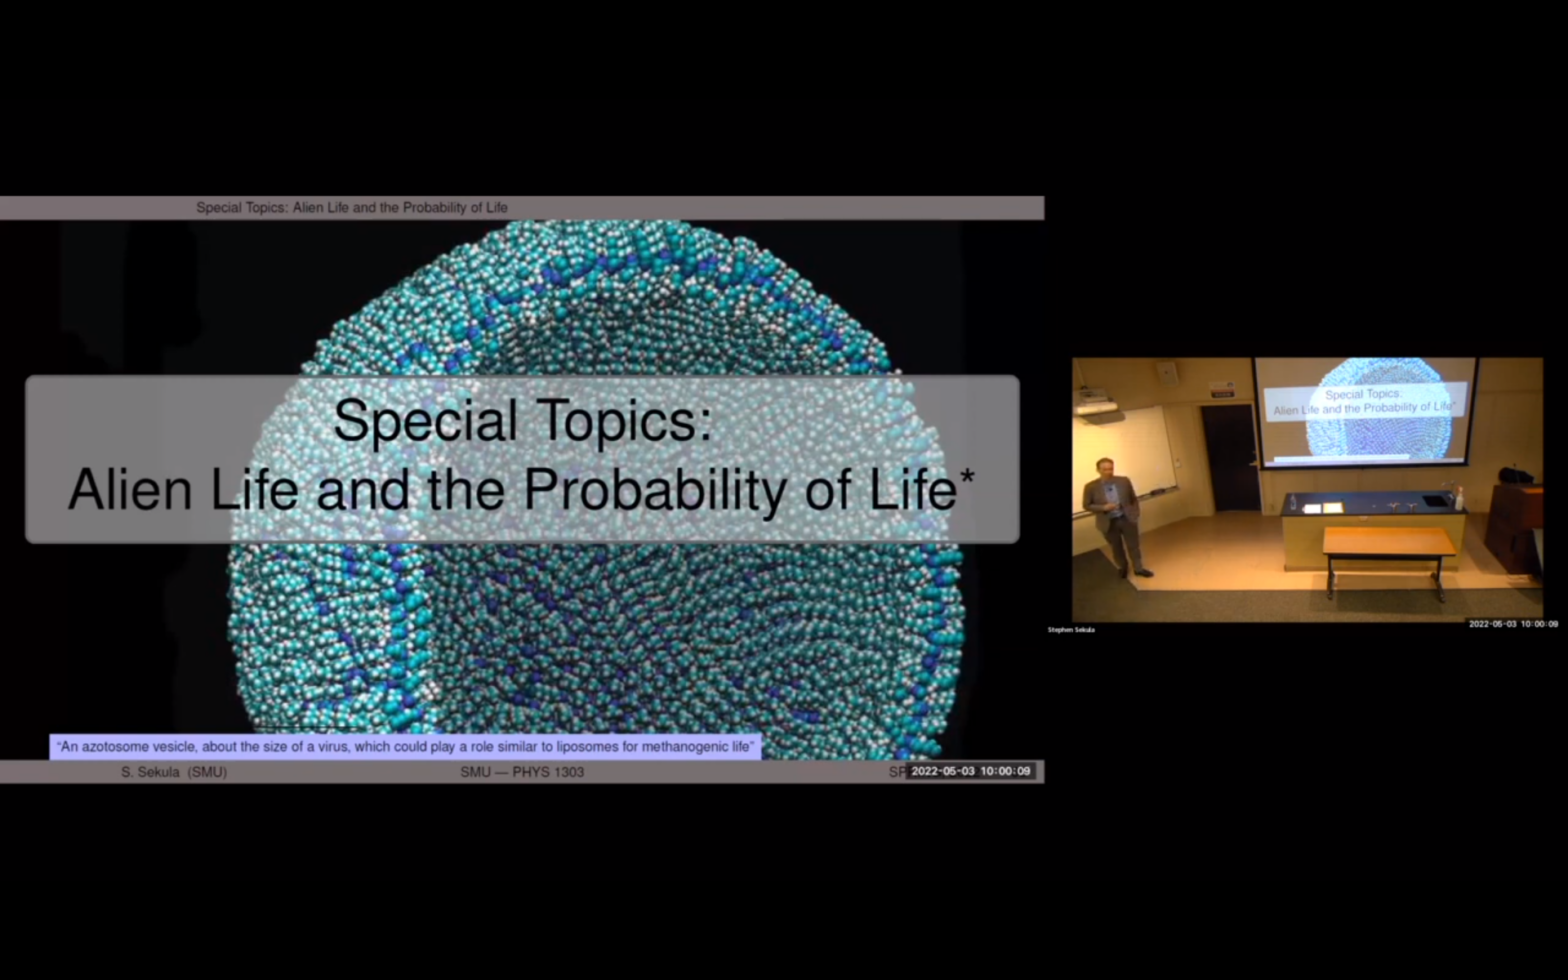 Last Lectures at SMU: Alien Life and the Probability of Life